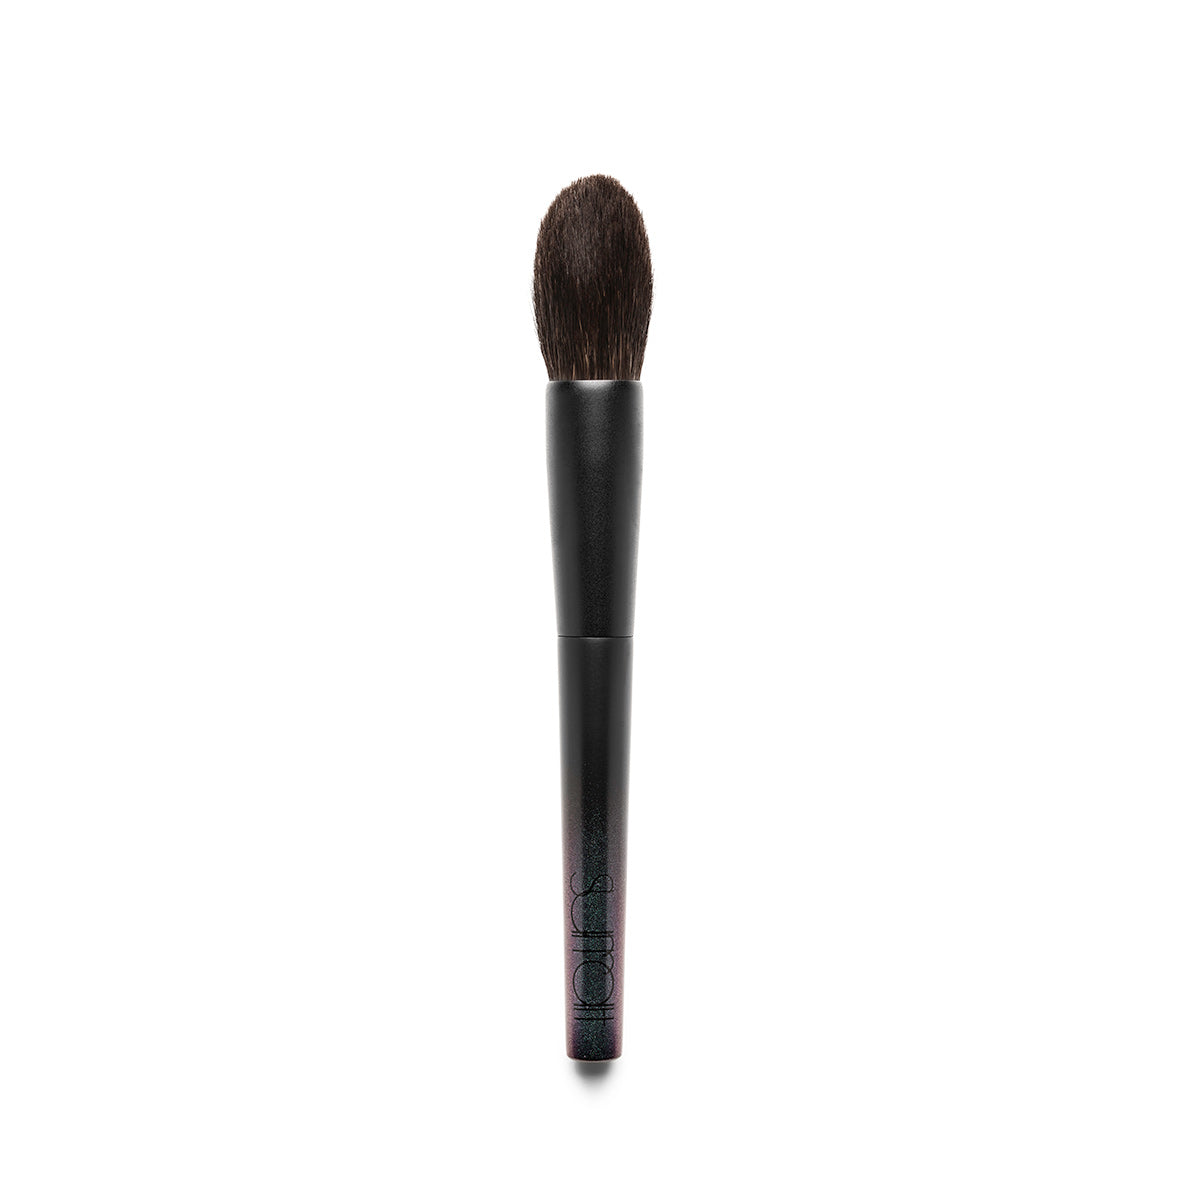 Artistique Eye and Face Brush Duo - ultra-soft natural hair makeup brush for highlighter